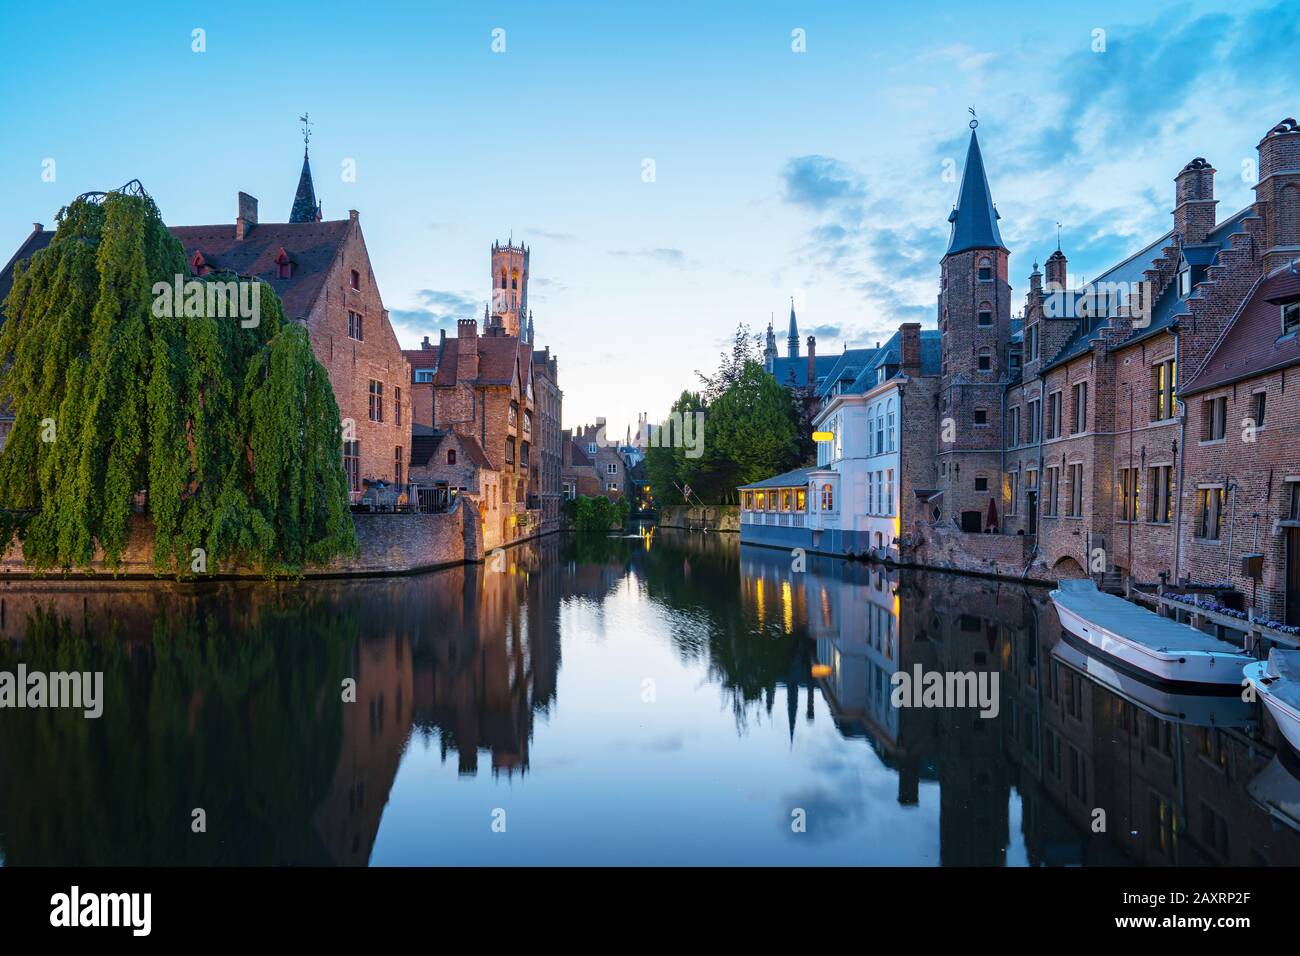 Bruges old town at night in Belgium. Stock Photo